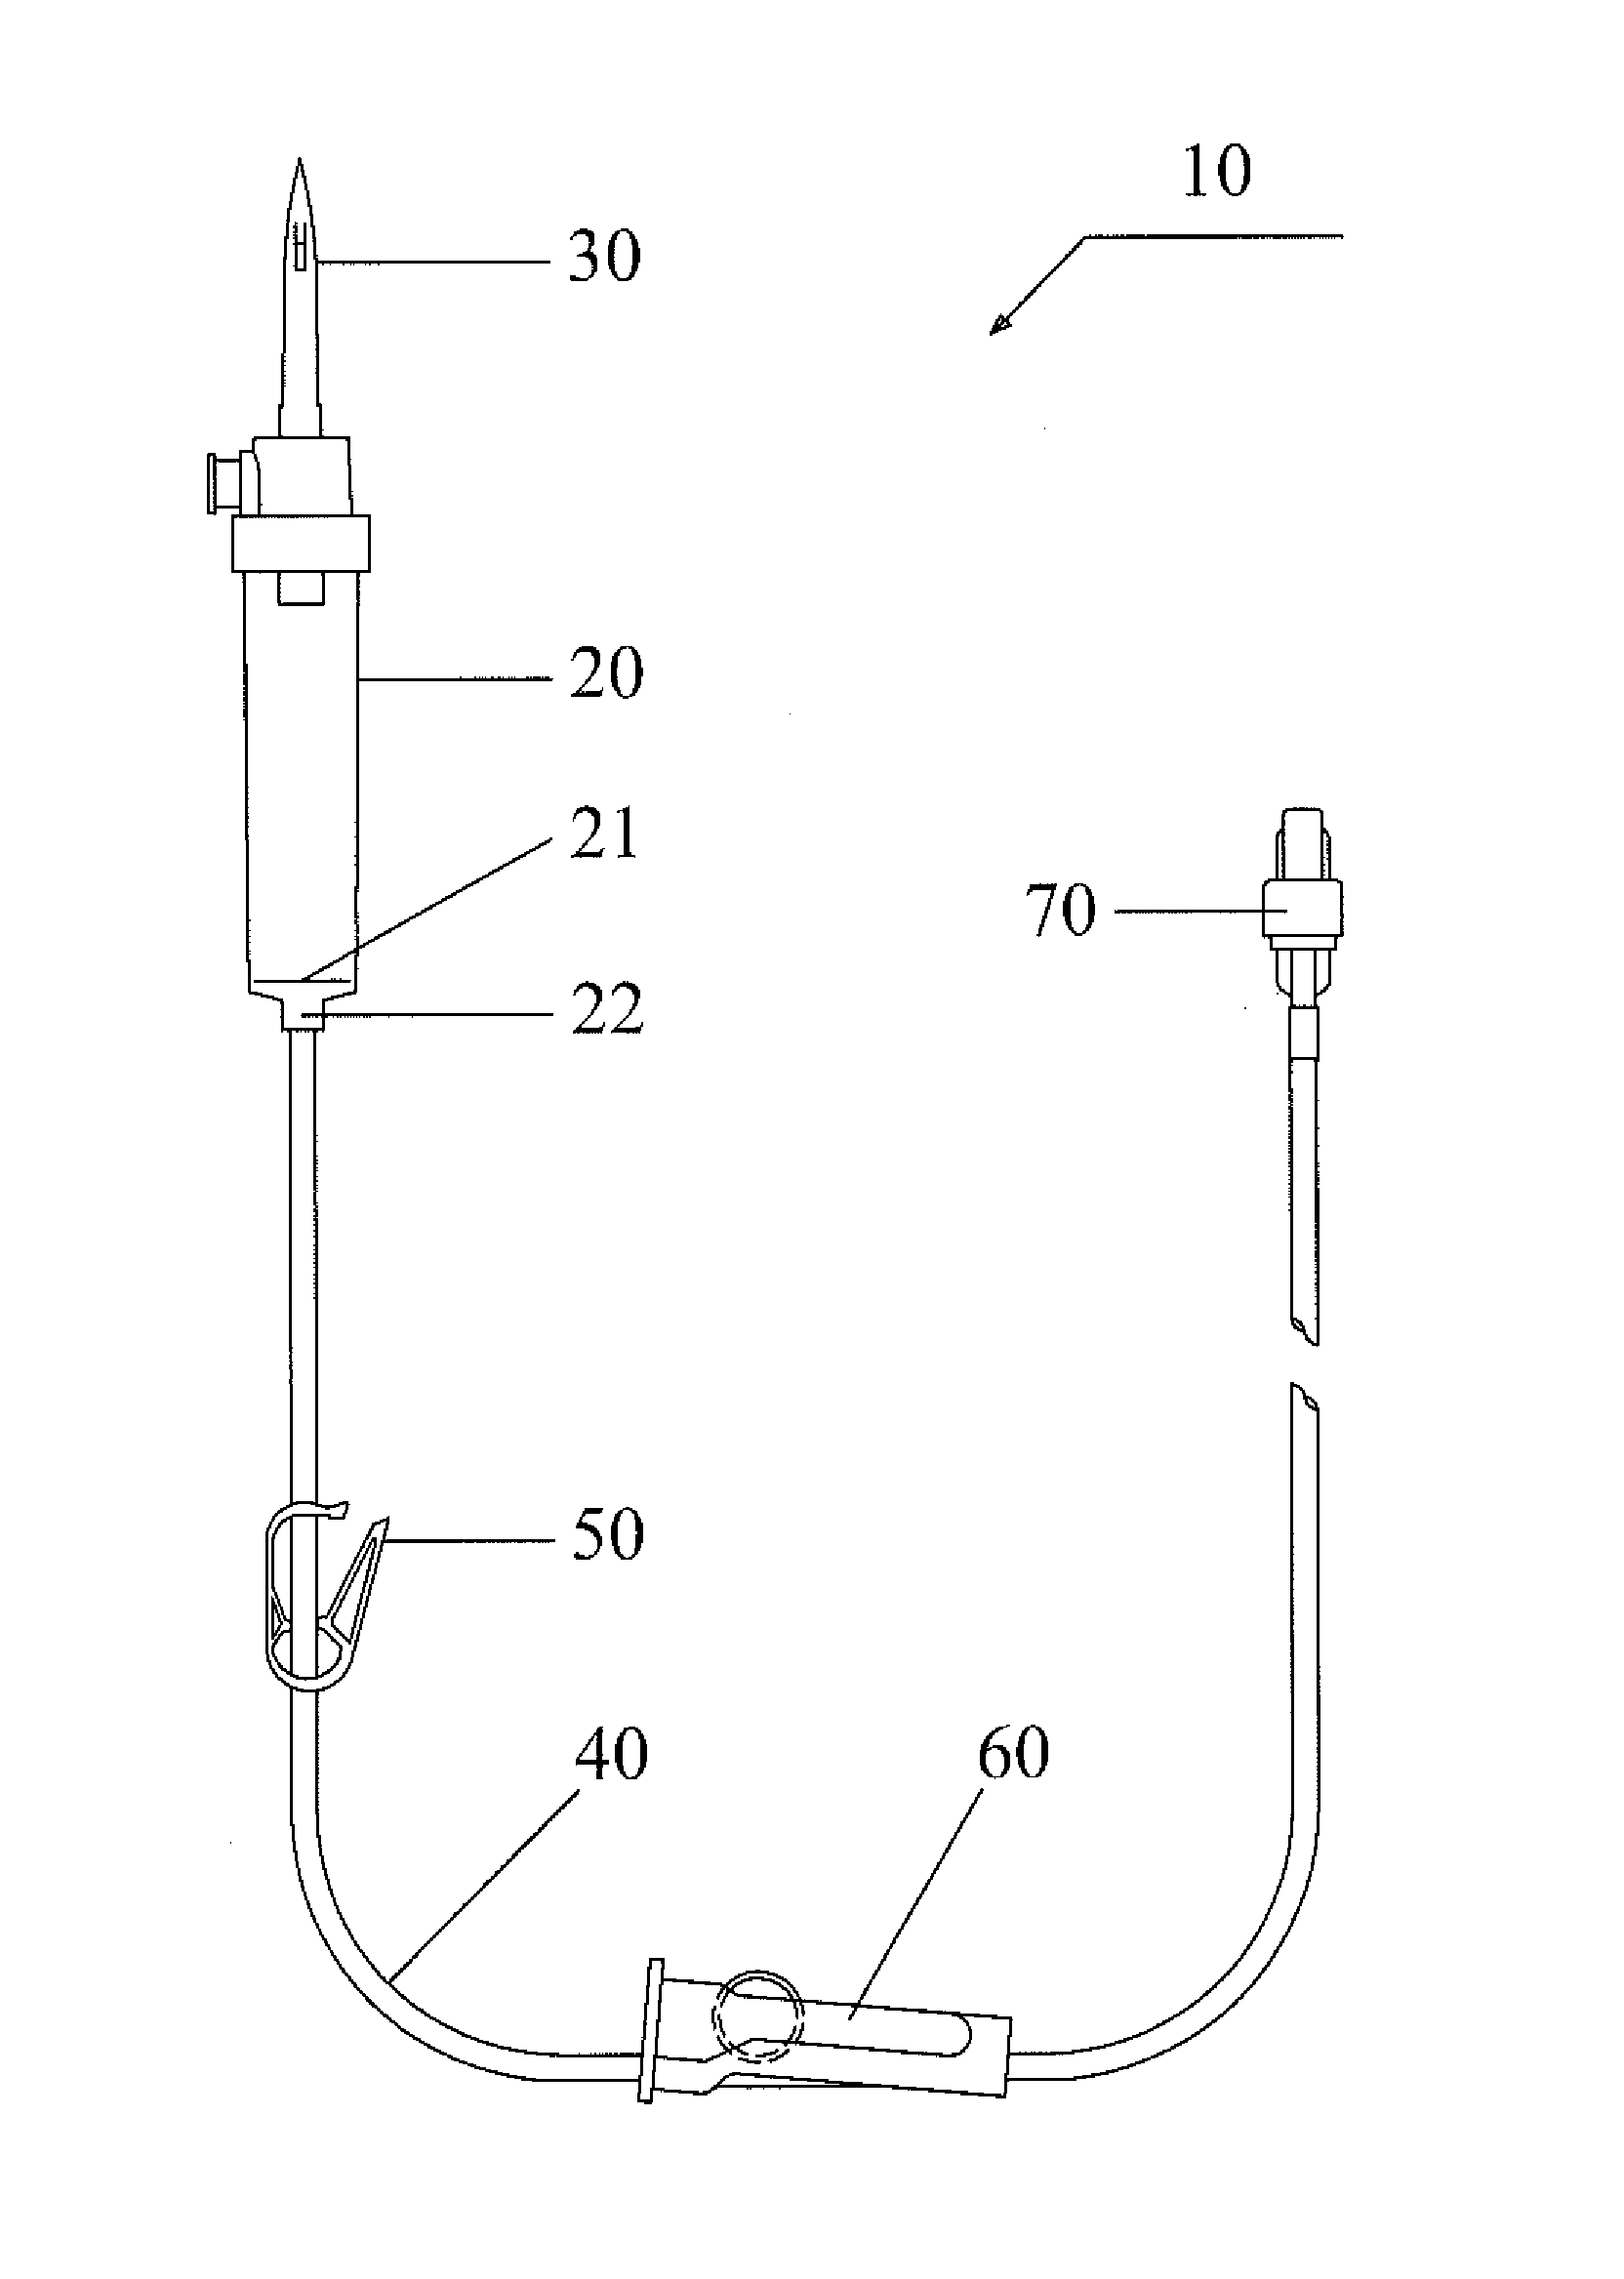 Infusion set that prevents air entry into infusion tubing